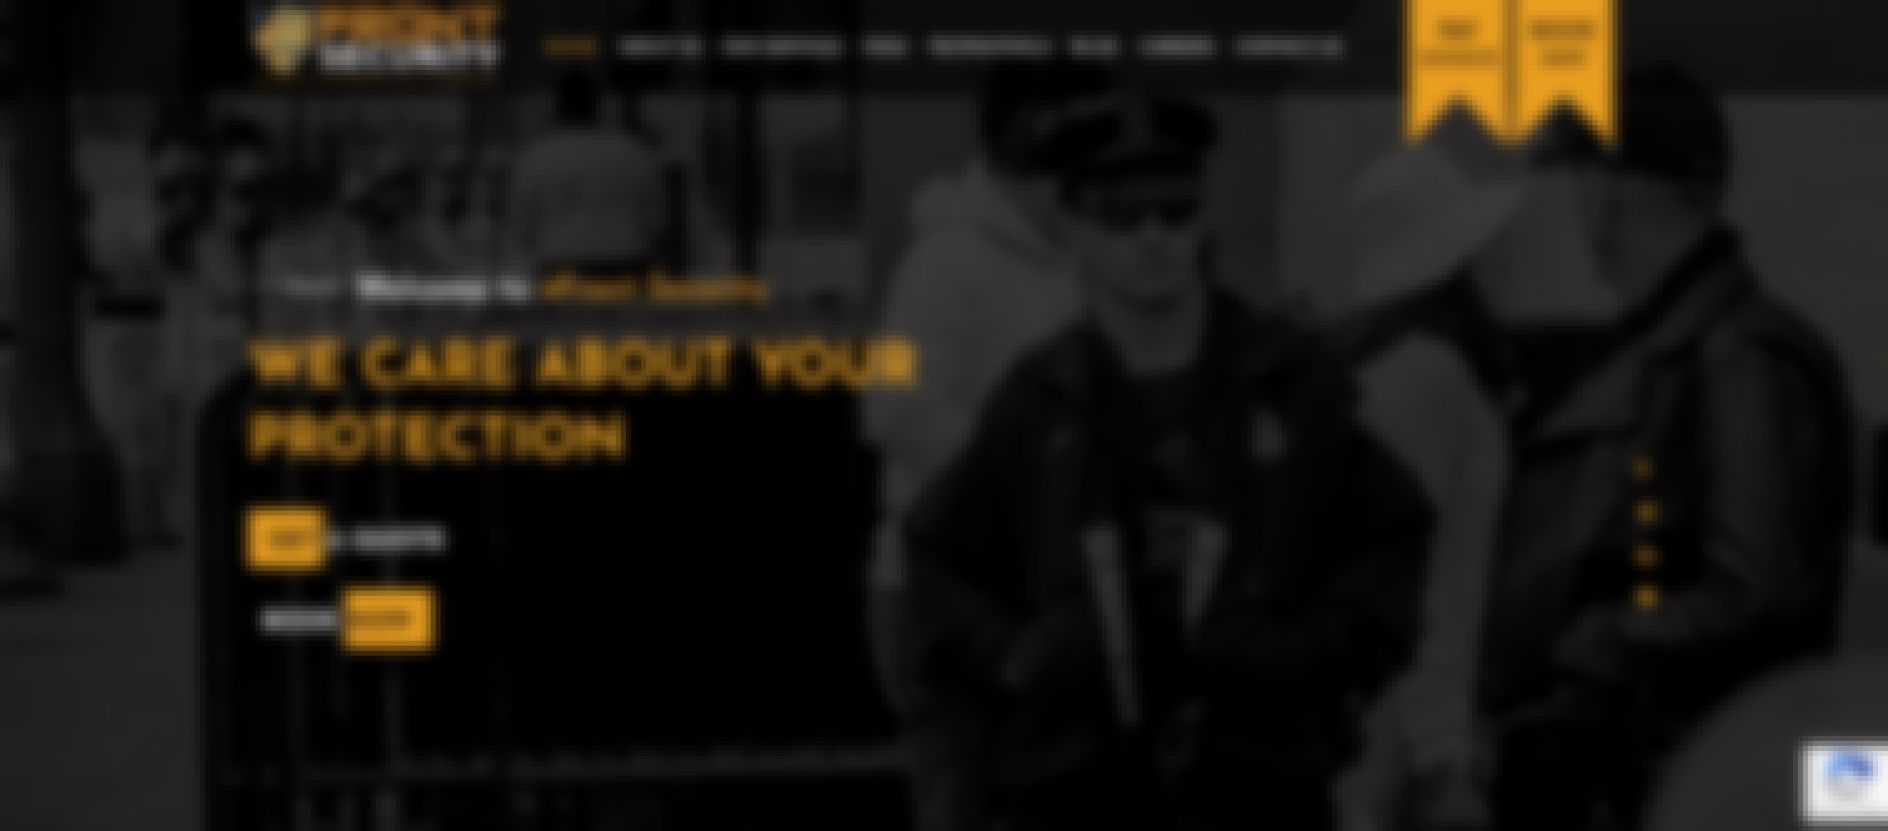 4front security security guard company sydney